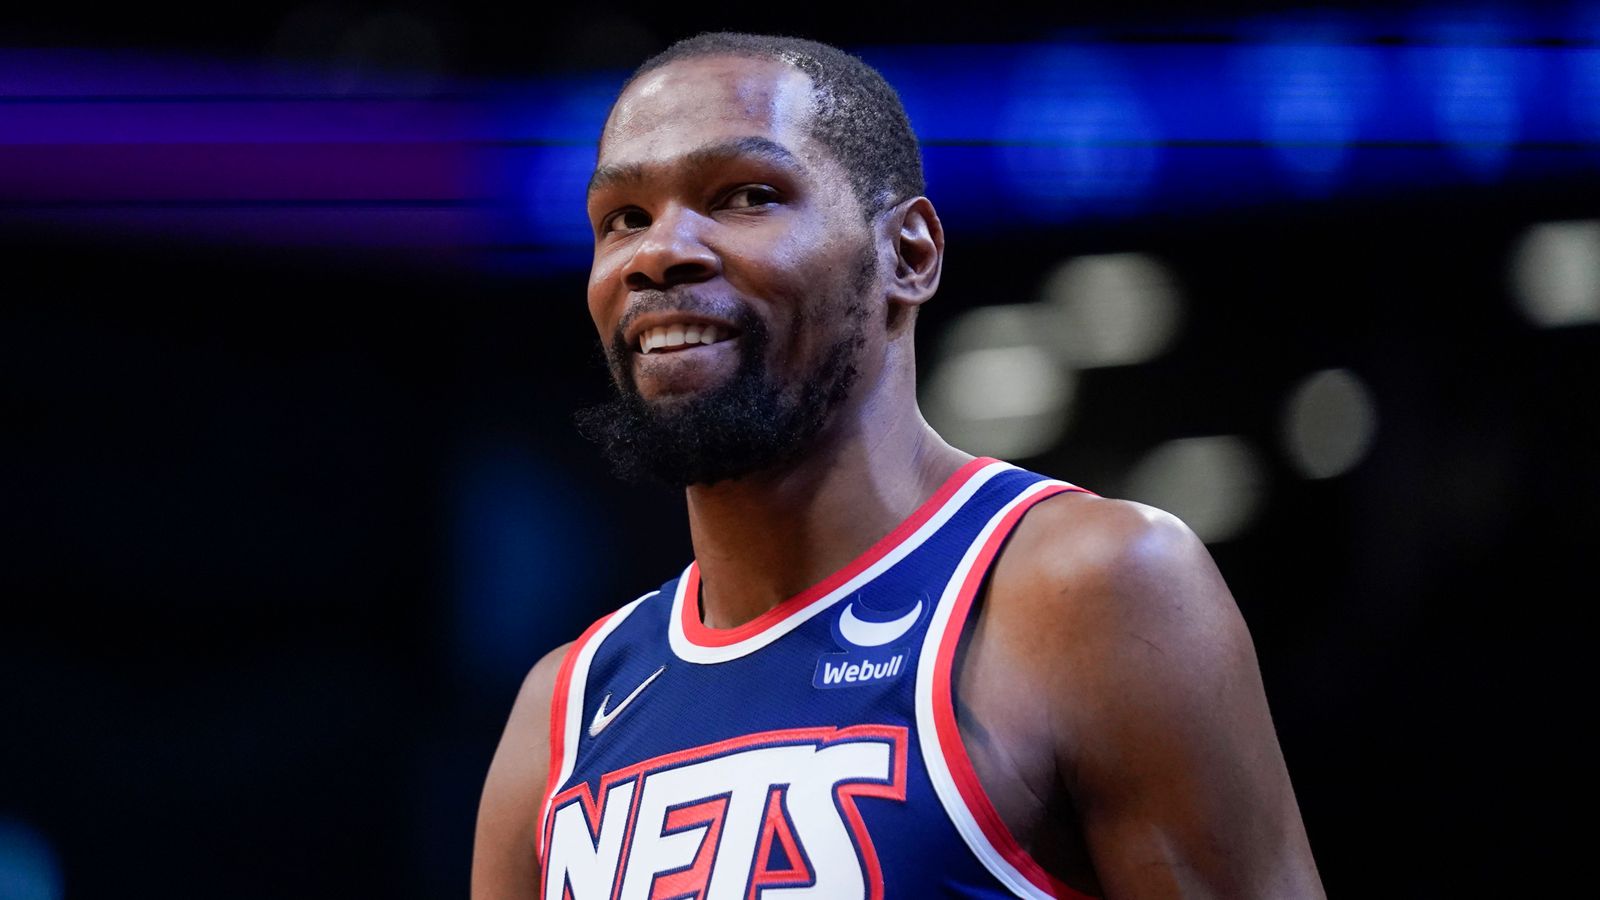 Kevin Durant explains Brooklyn Nets trade request, citing doubts over team stability